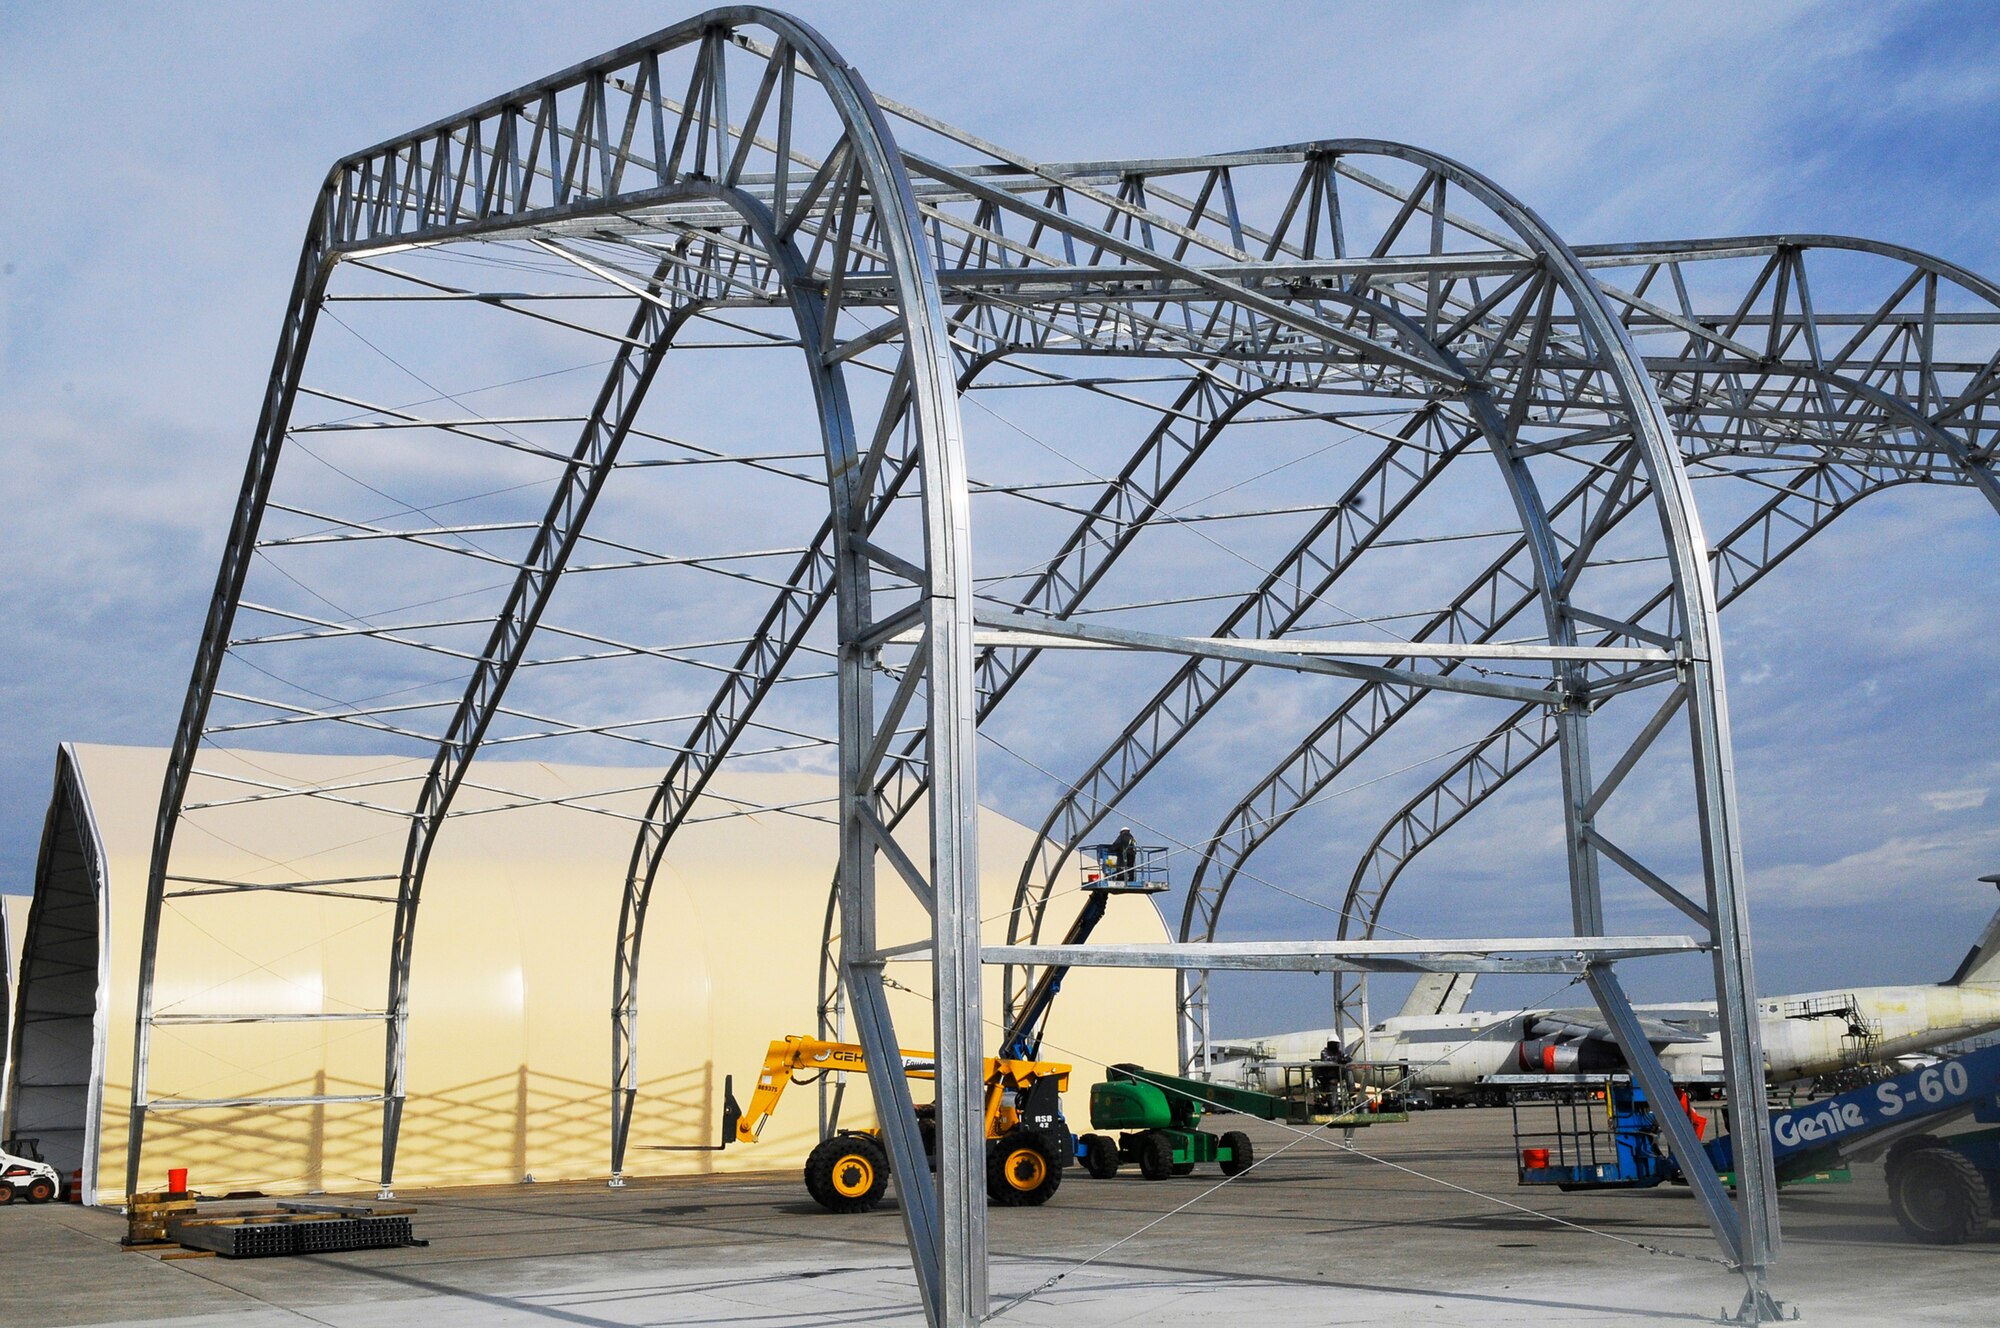 The construction of new steel and fabric structures to house C-130 aircraft is on schedule to be completed by this summer. U. S. Air Force photo by Sue Sapp